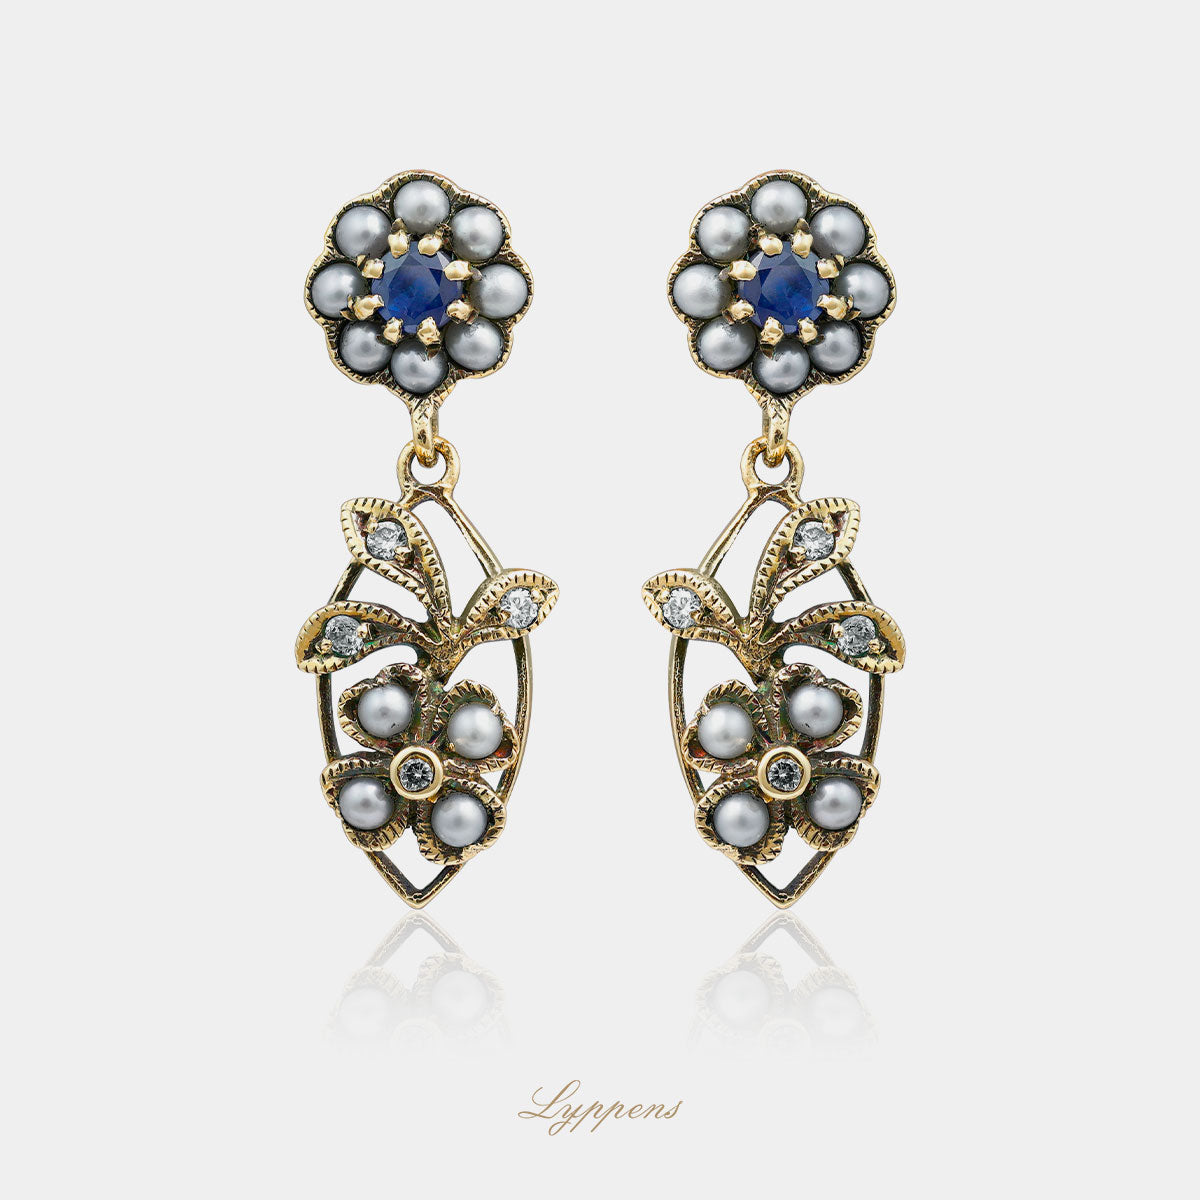 Yellow gold drop earrings with pearls, sapphire and diamonds